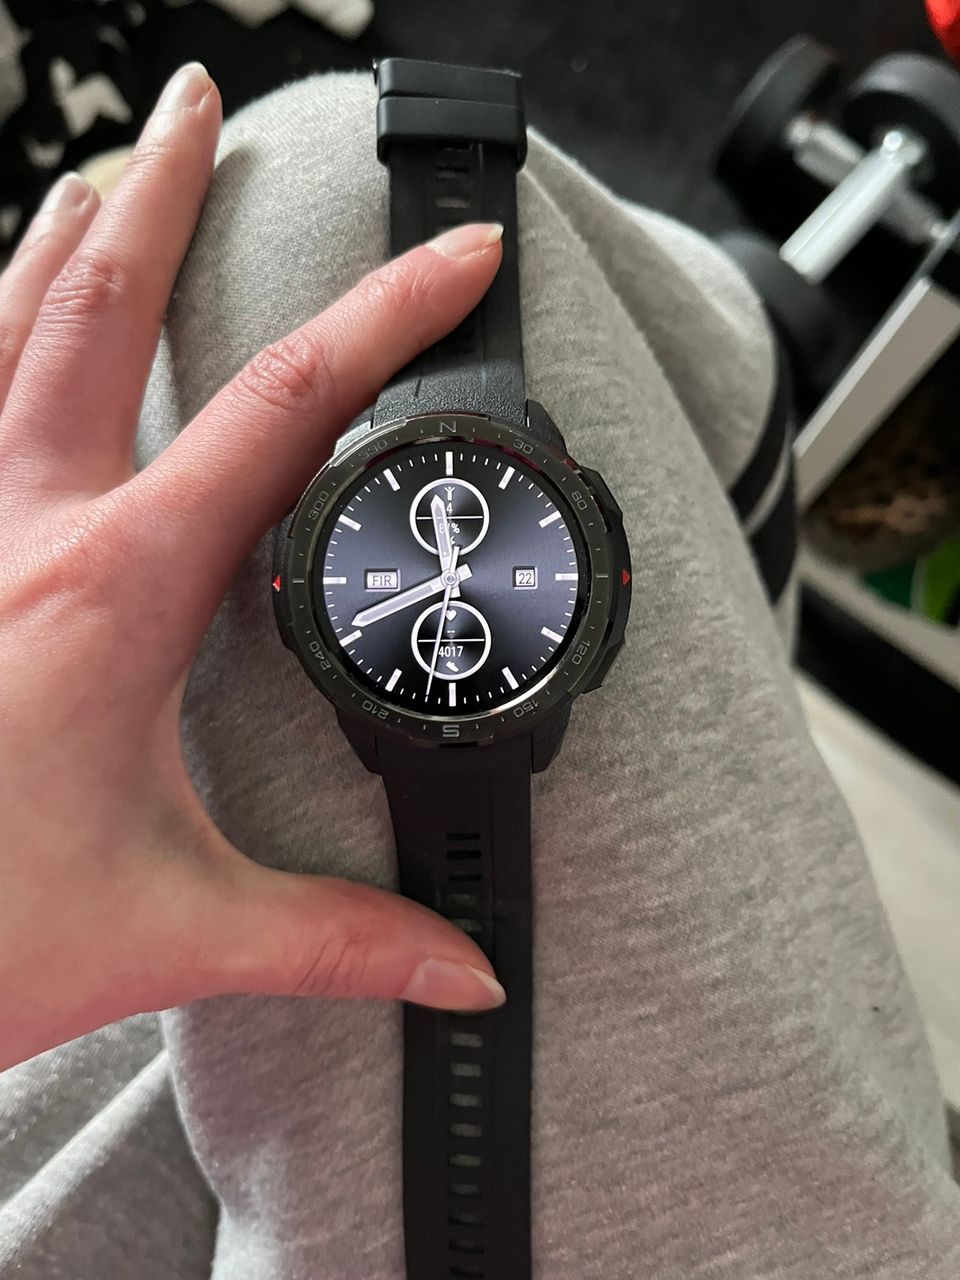 Honor watch gs pro charcoal black